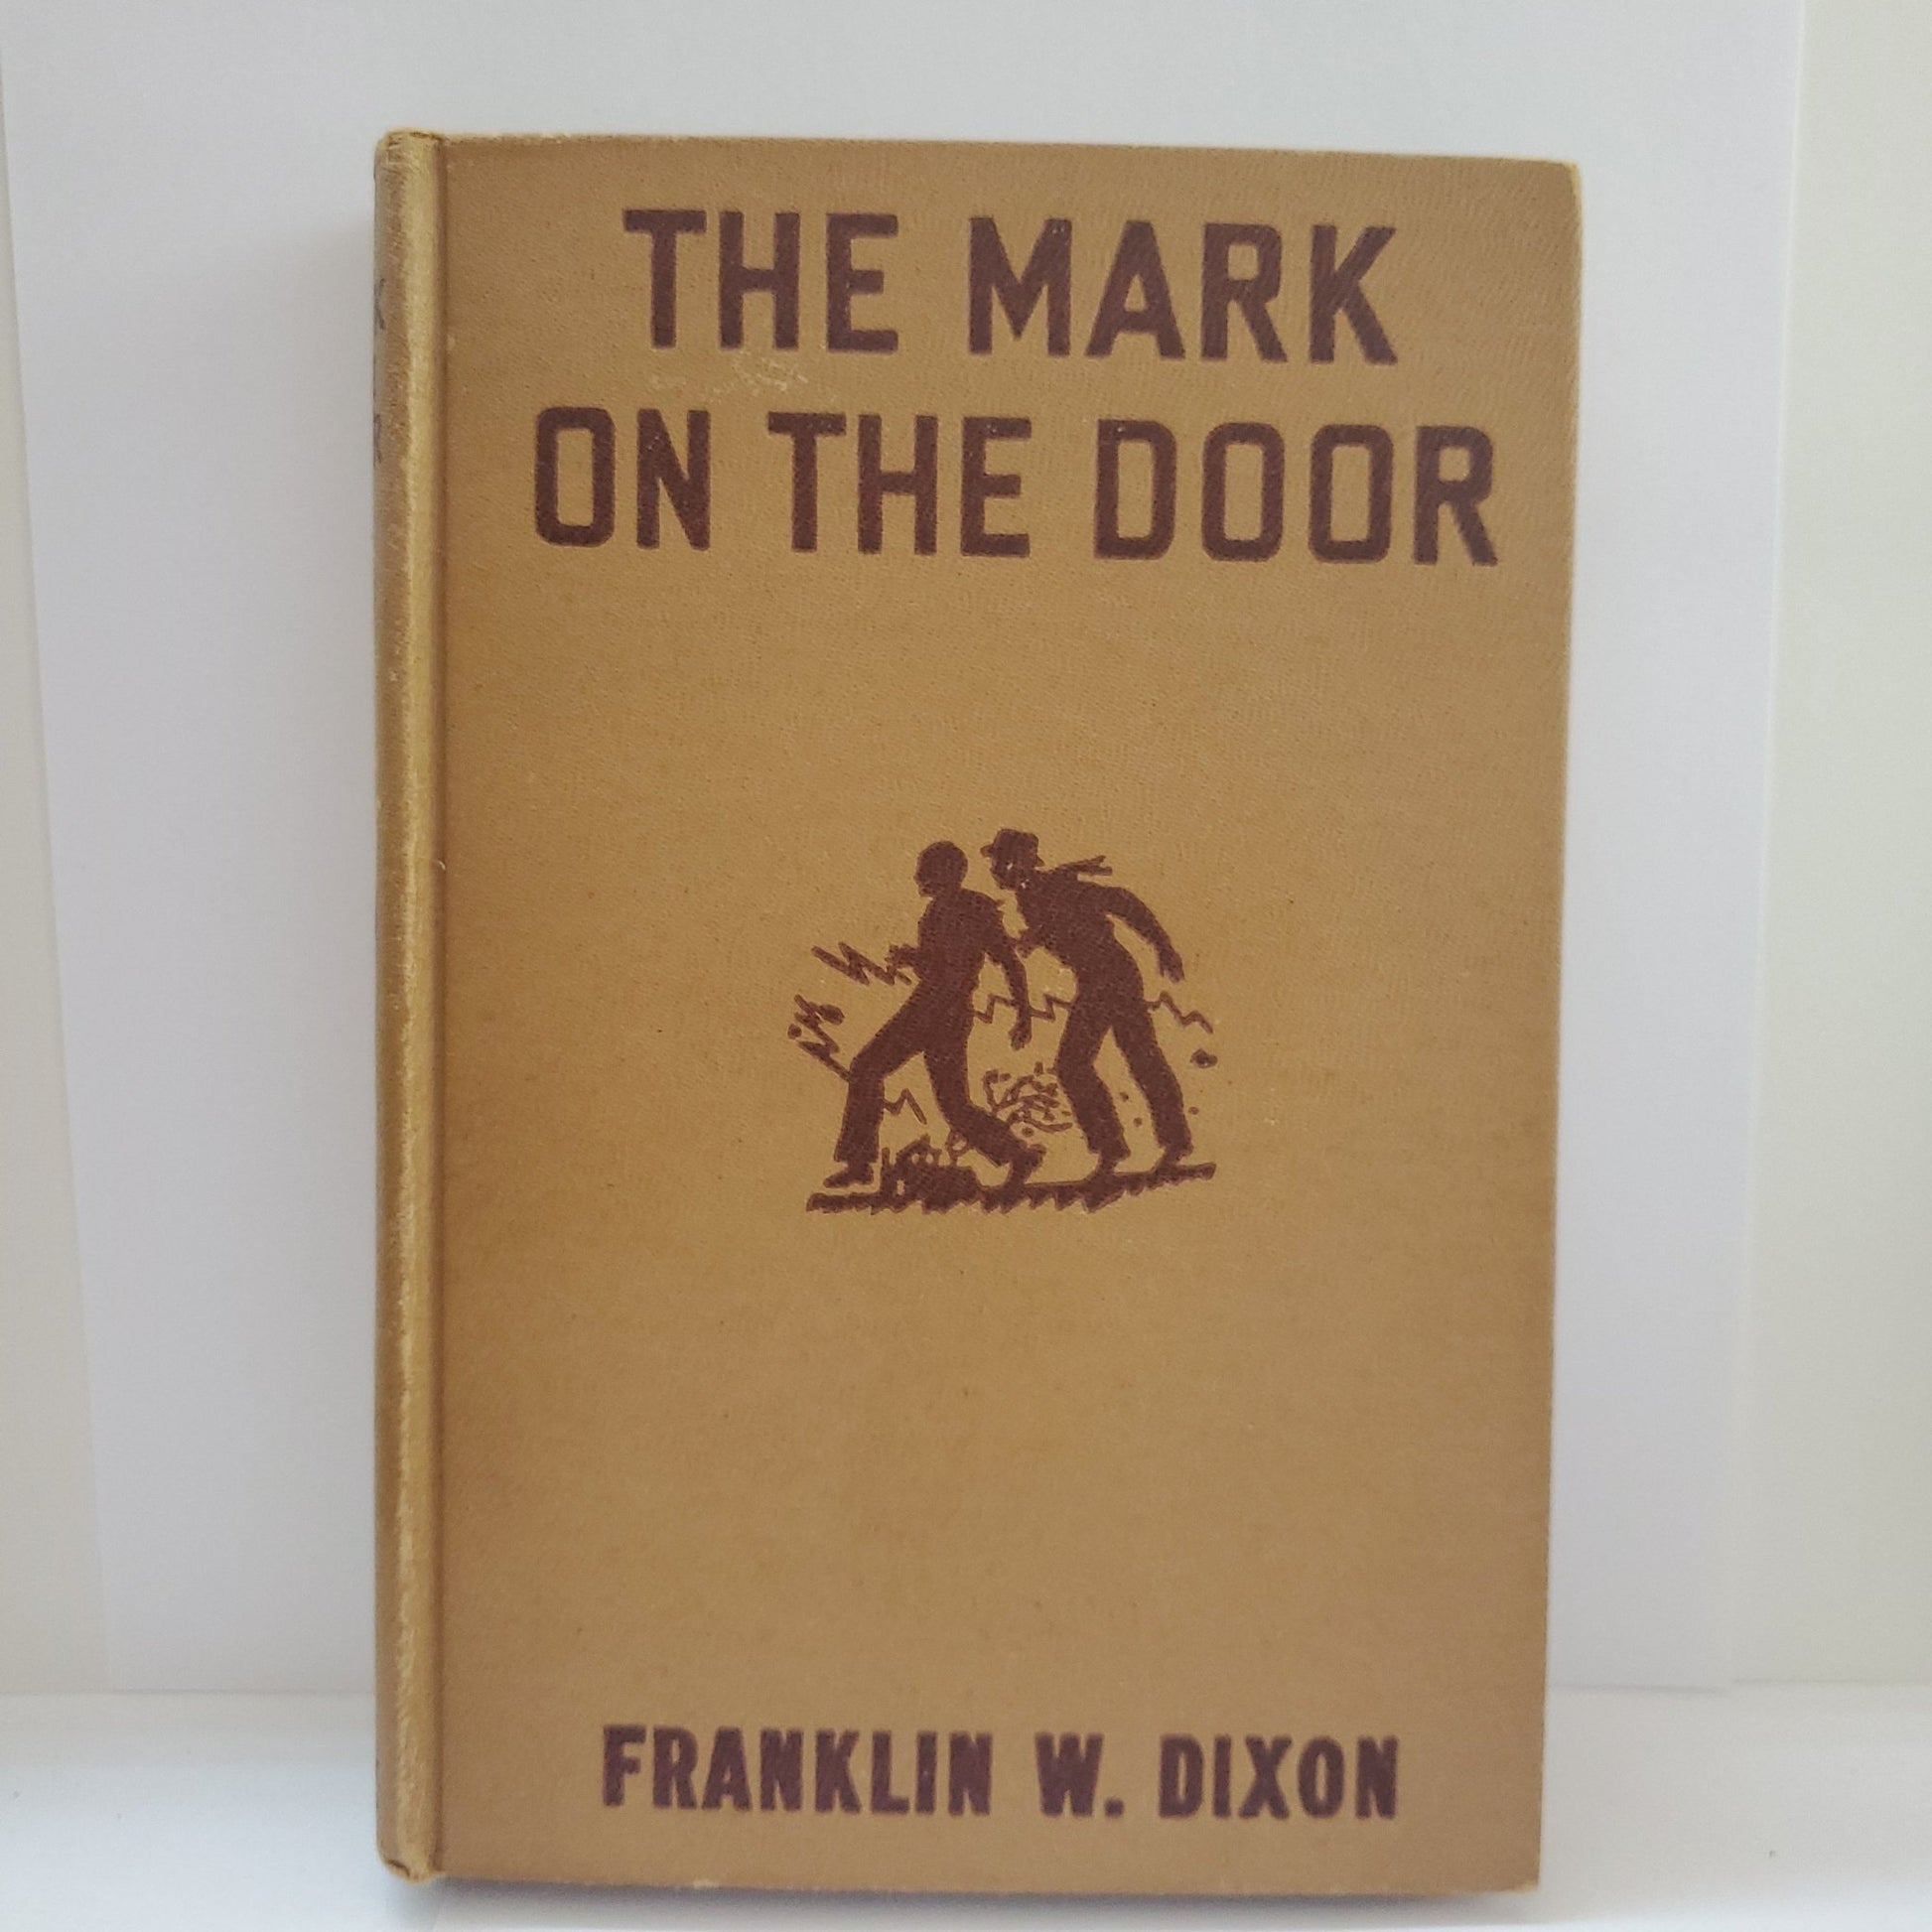 The Mark on the Door - [ash-ling] Booksellers